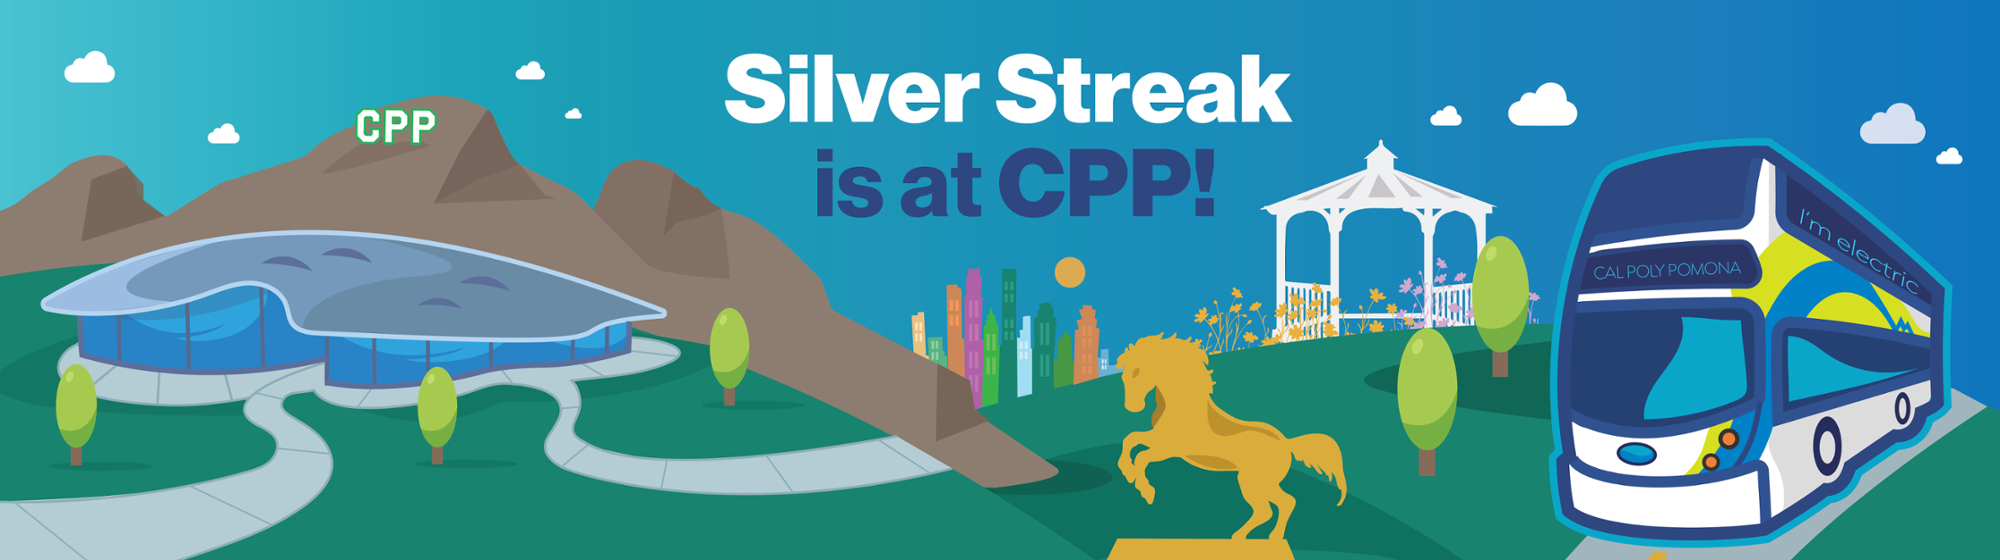 Silver Streak is at CPP